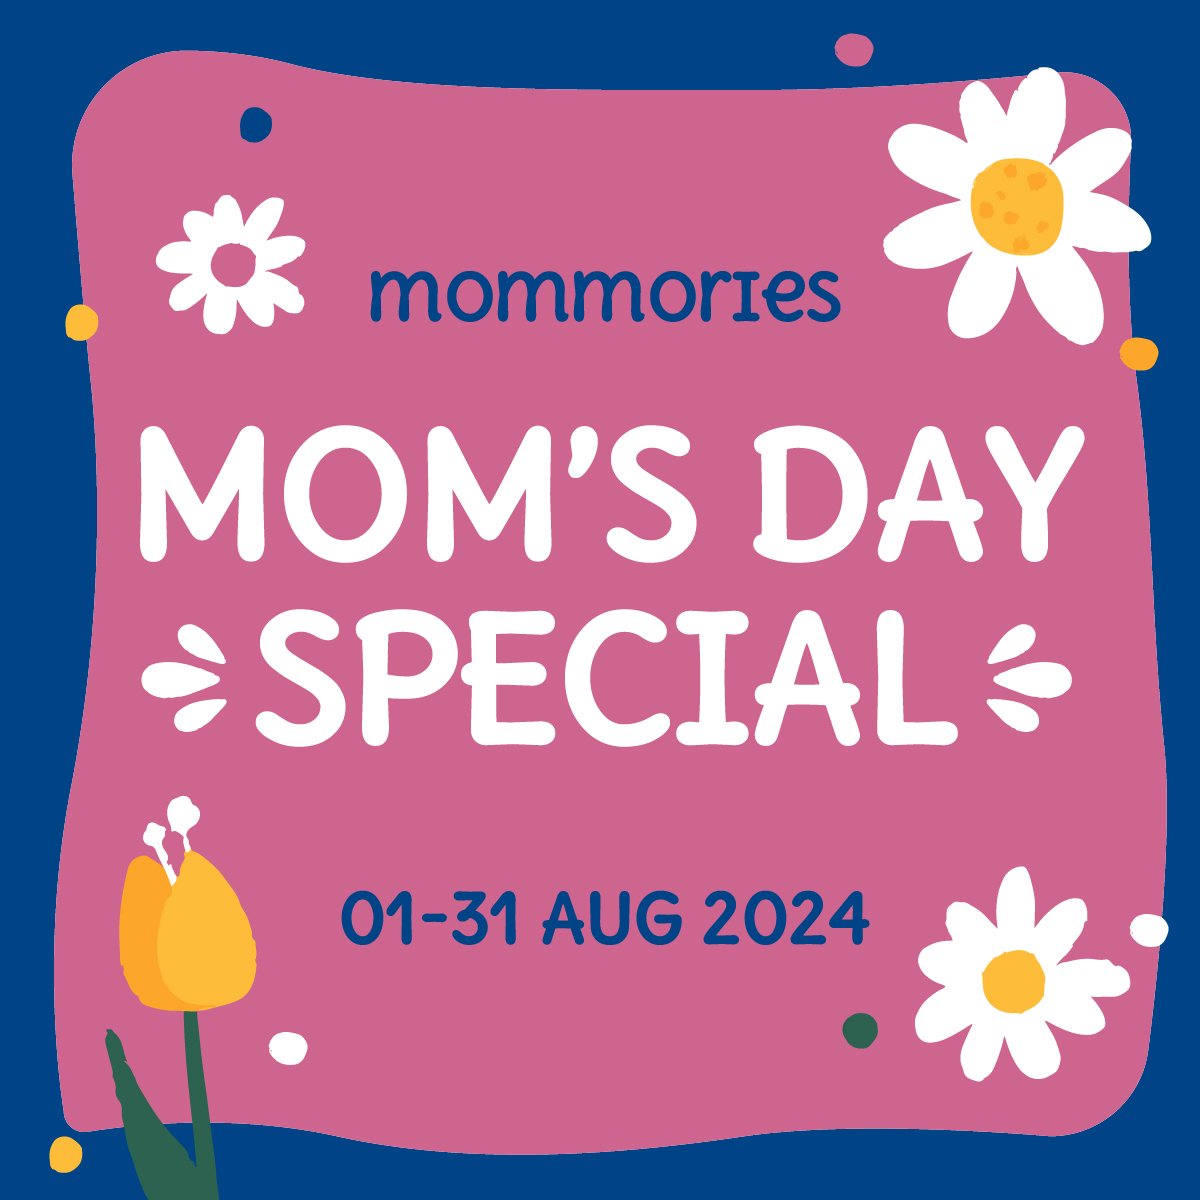 Mom's Day Special